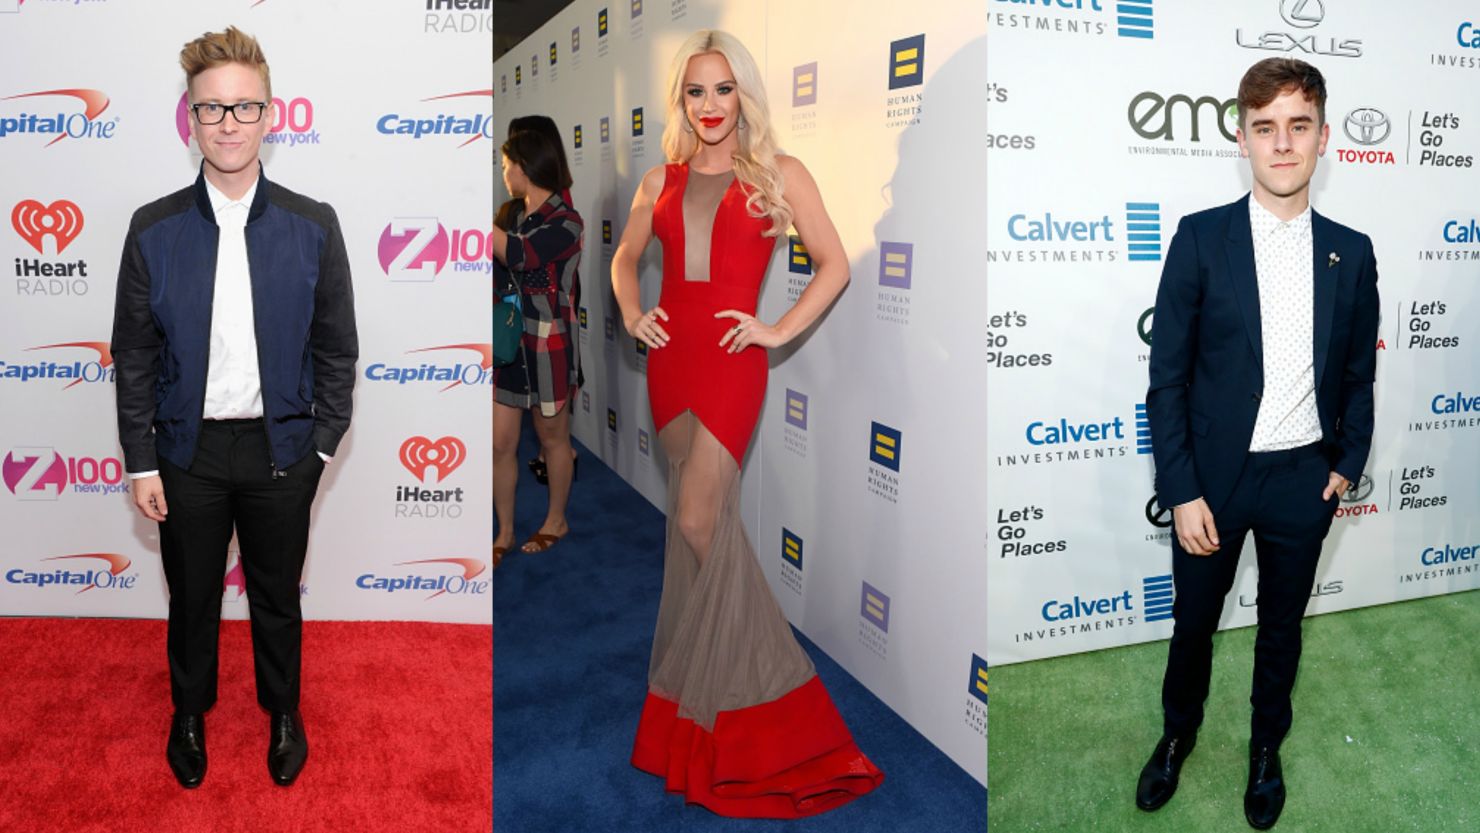 Tyler Oakley, Gigi Gorgeous and Conner Franta, from left, were among the YouTubers affected.